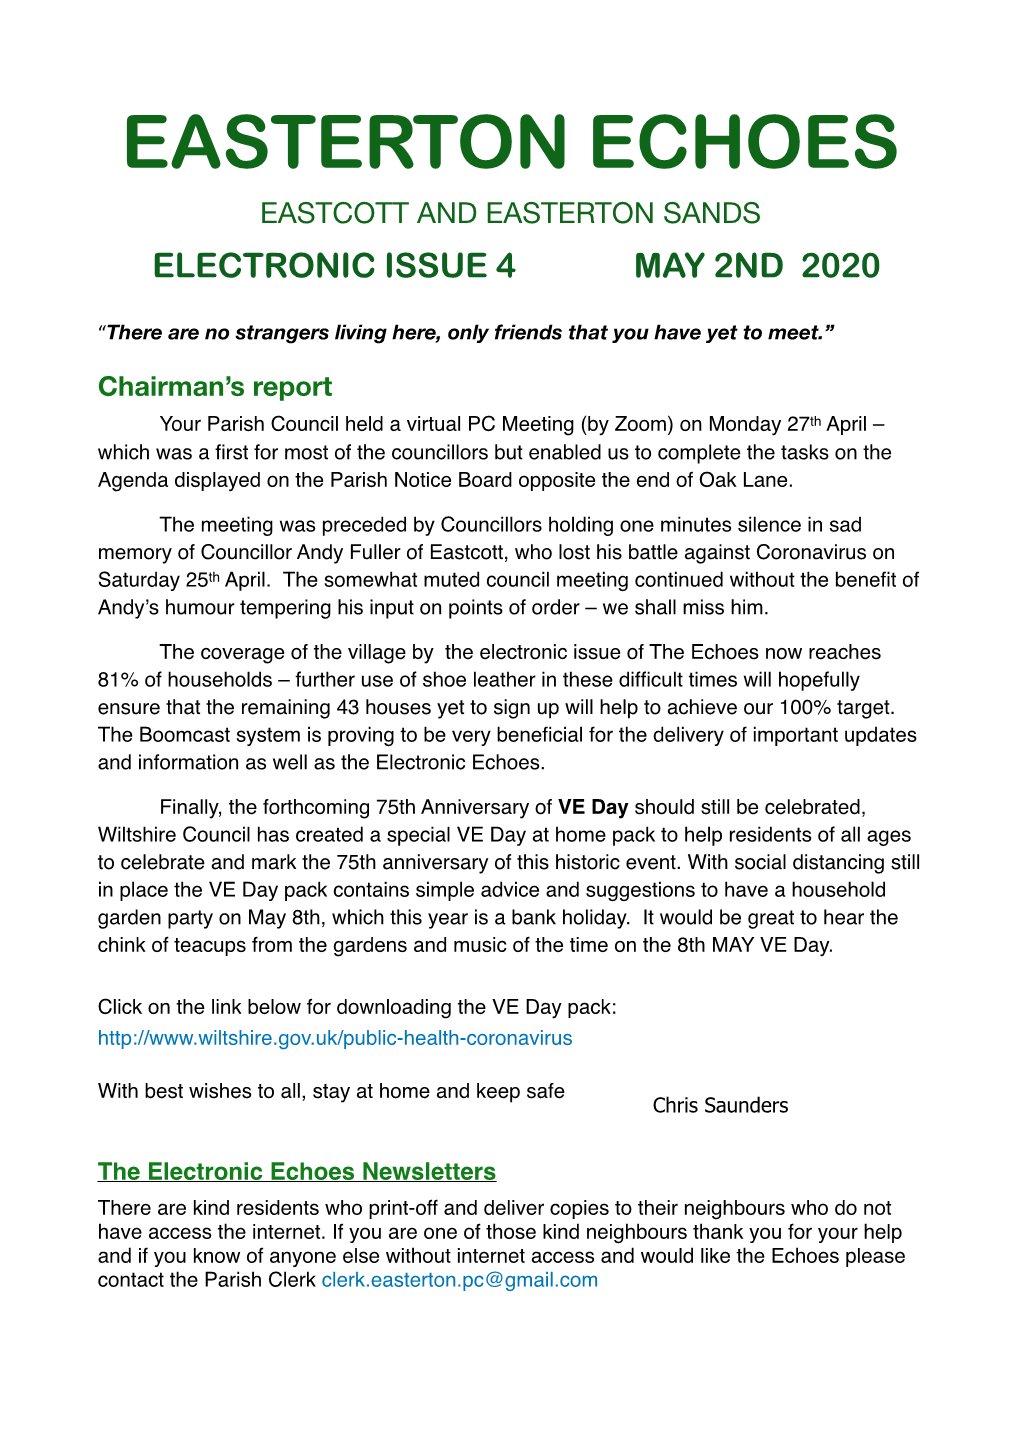 EE Easterton Echoes May 2Nd 2020. Issue 4